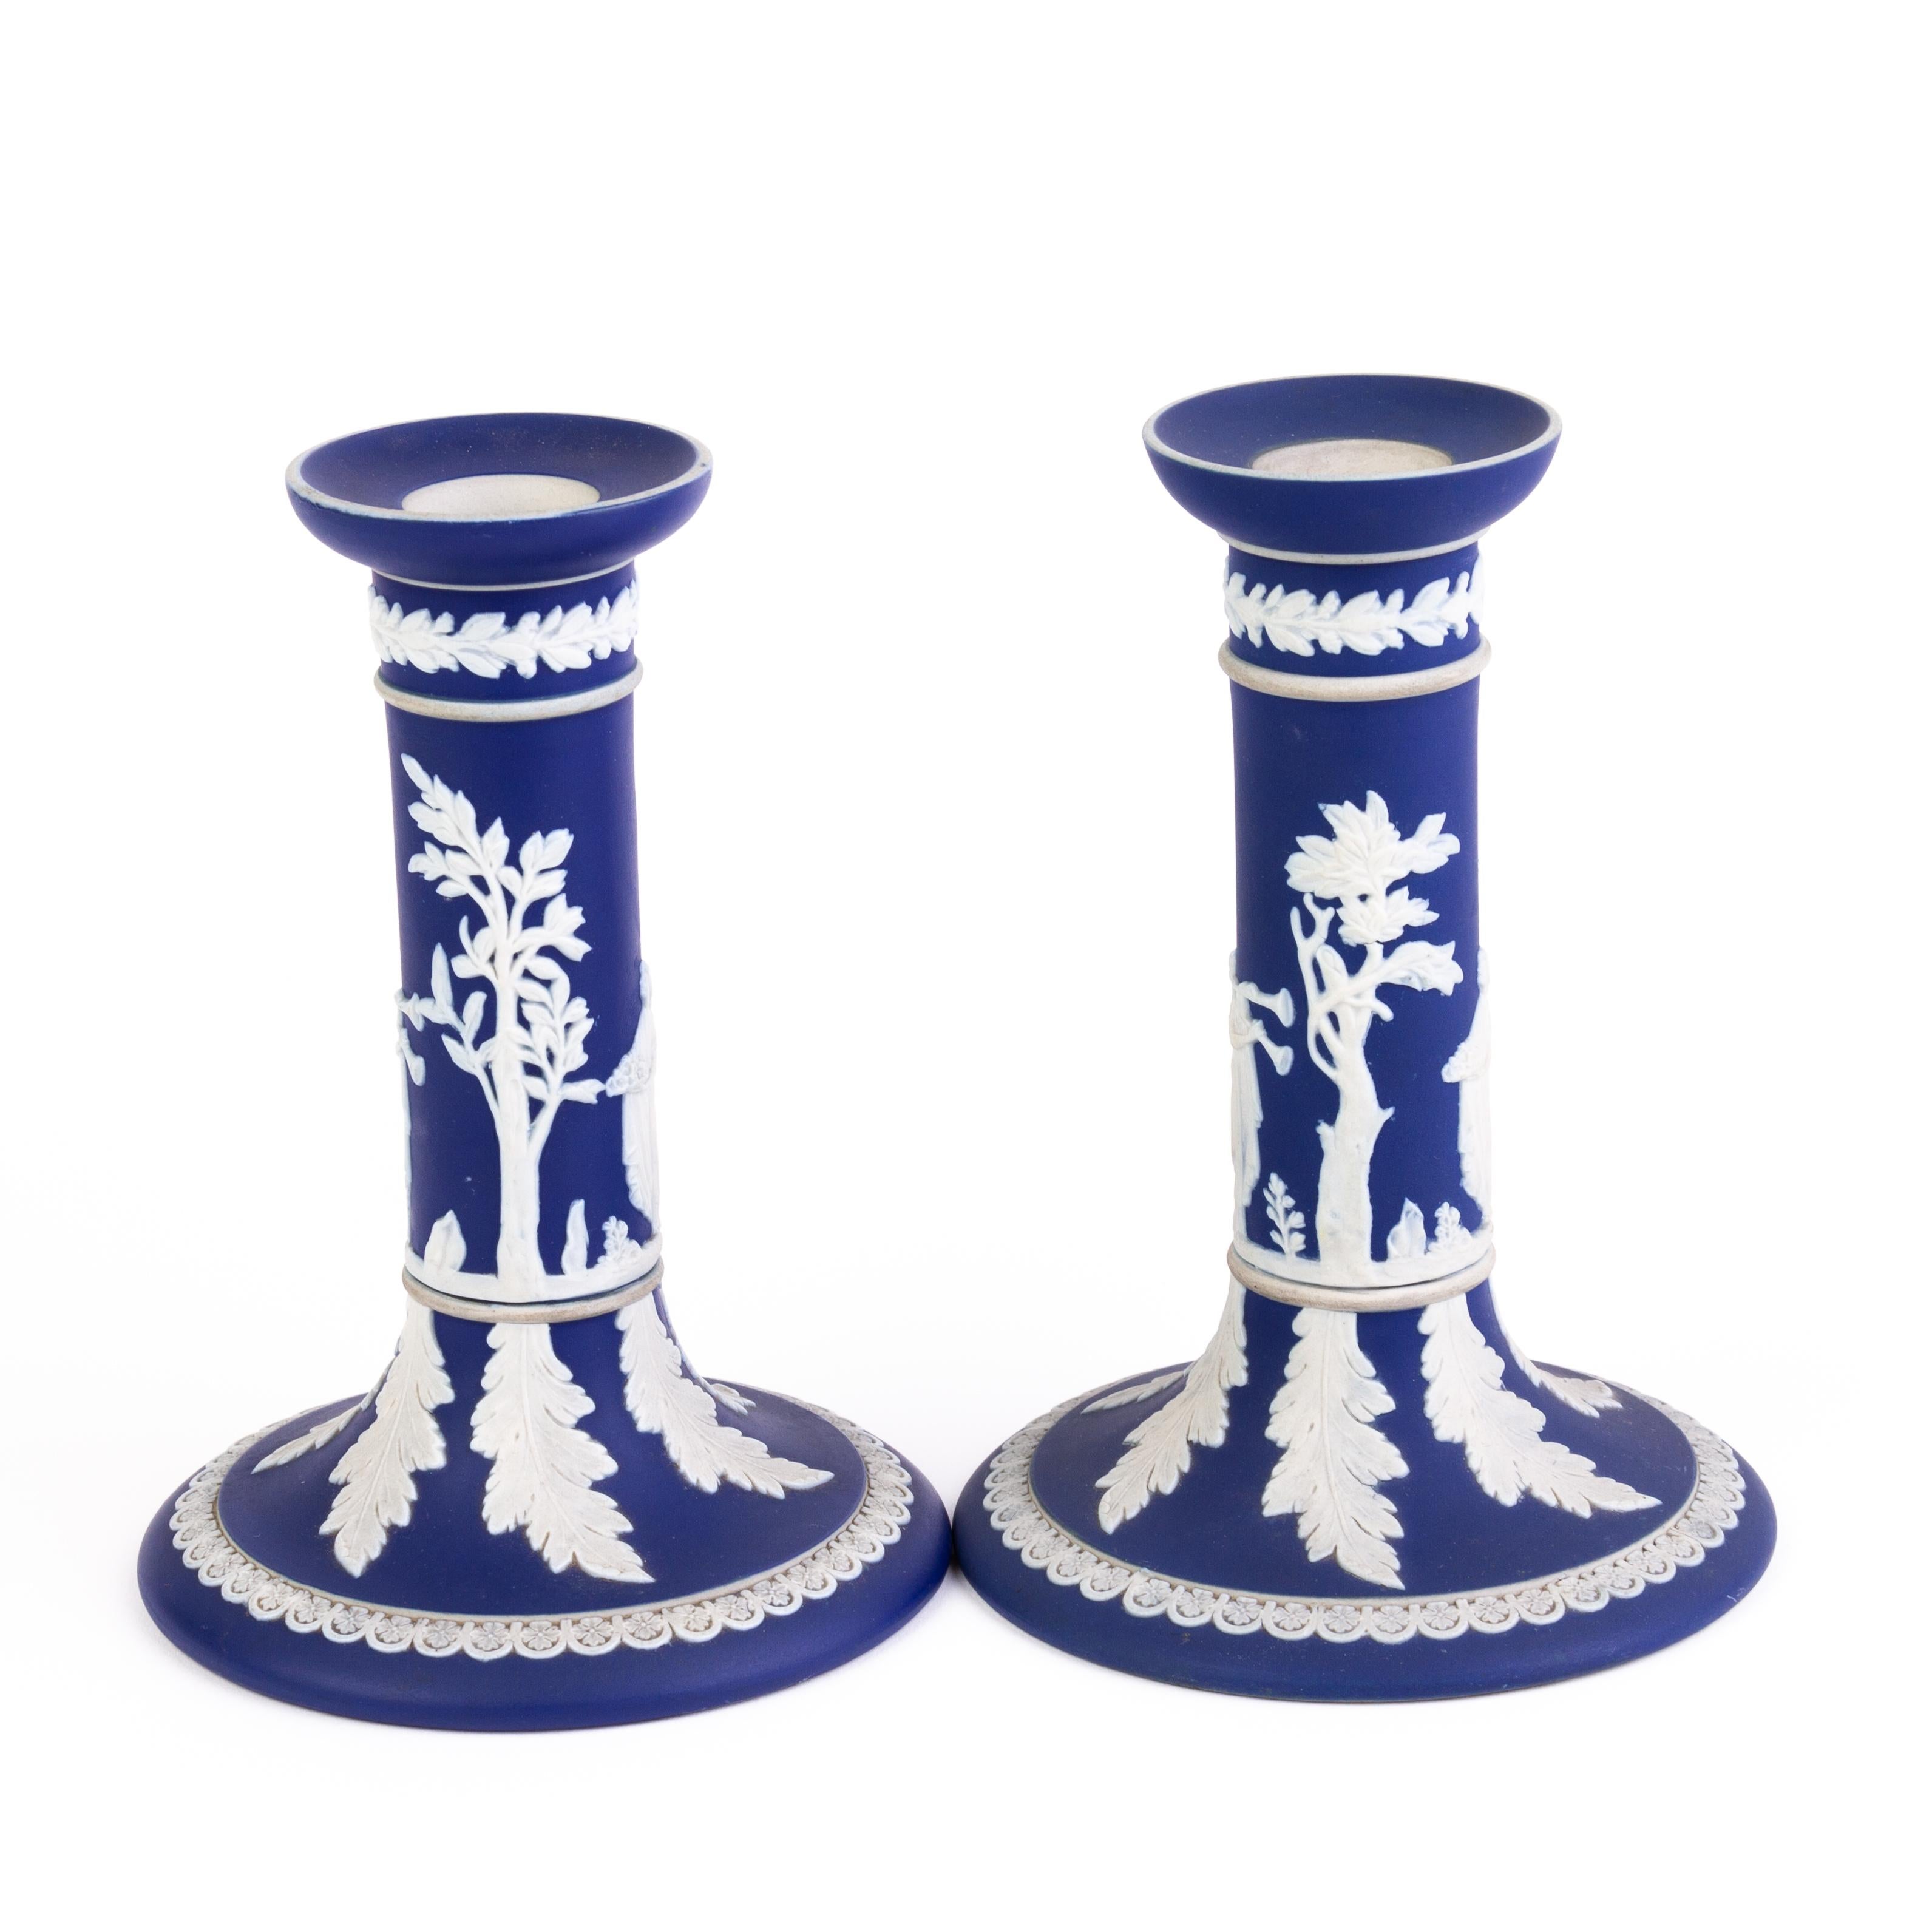 In good condition
From a private collection
Free international shipping
Wedgwood Portland Blue Jasperware Neoclassical Cameo Candlesticks